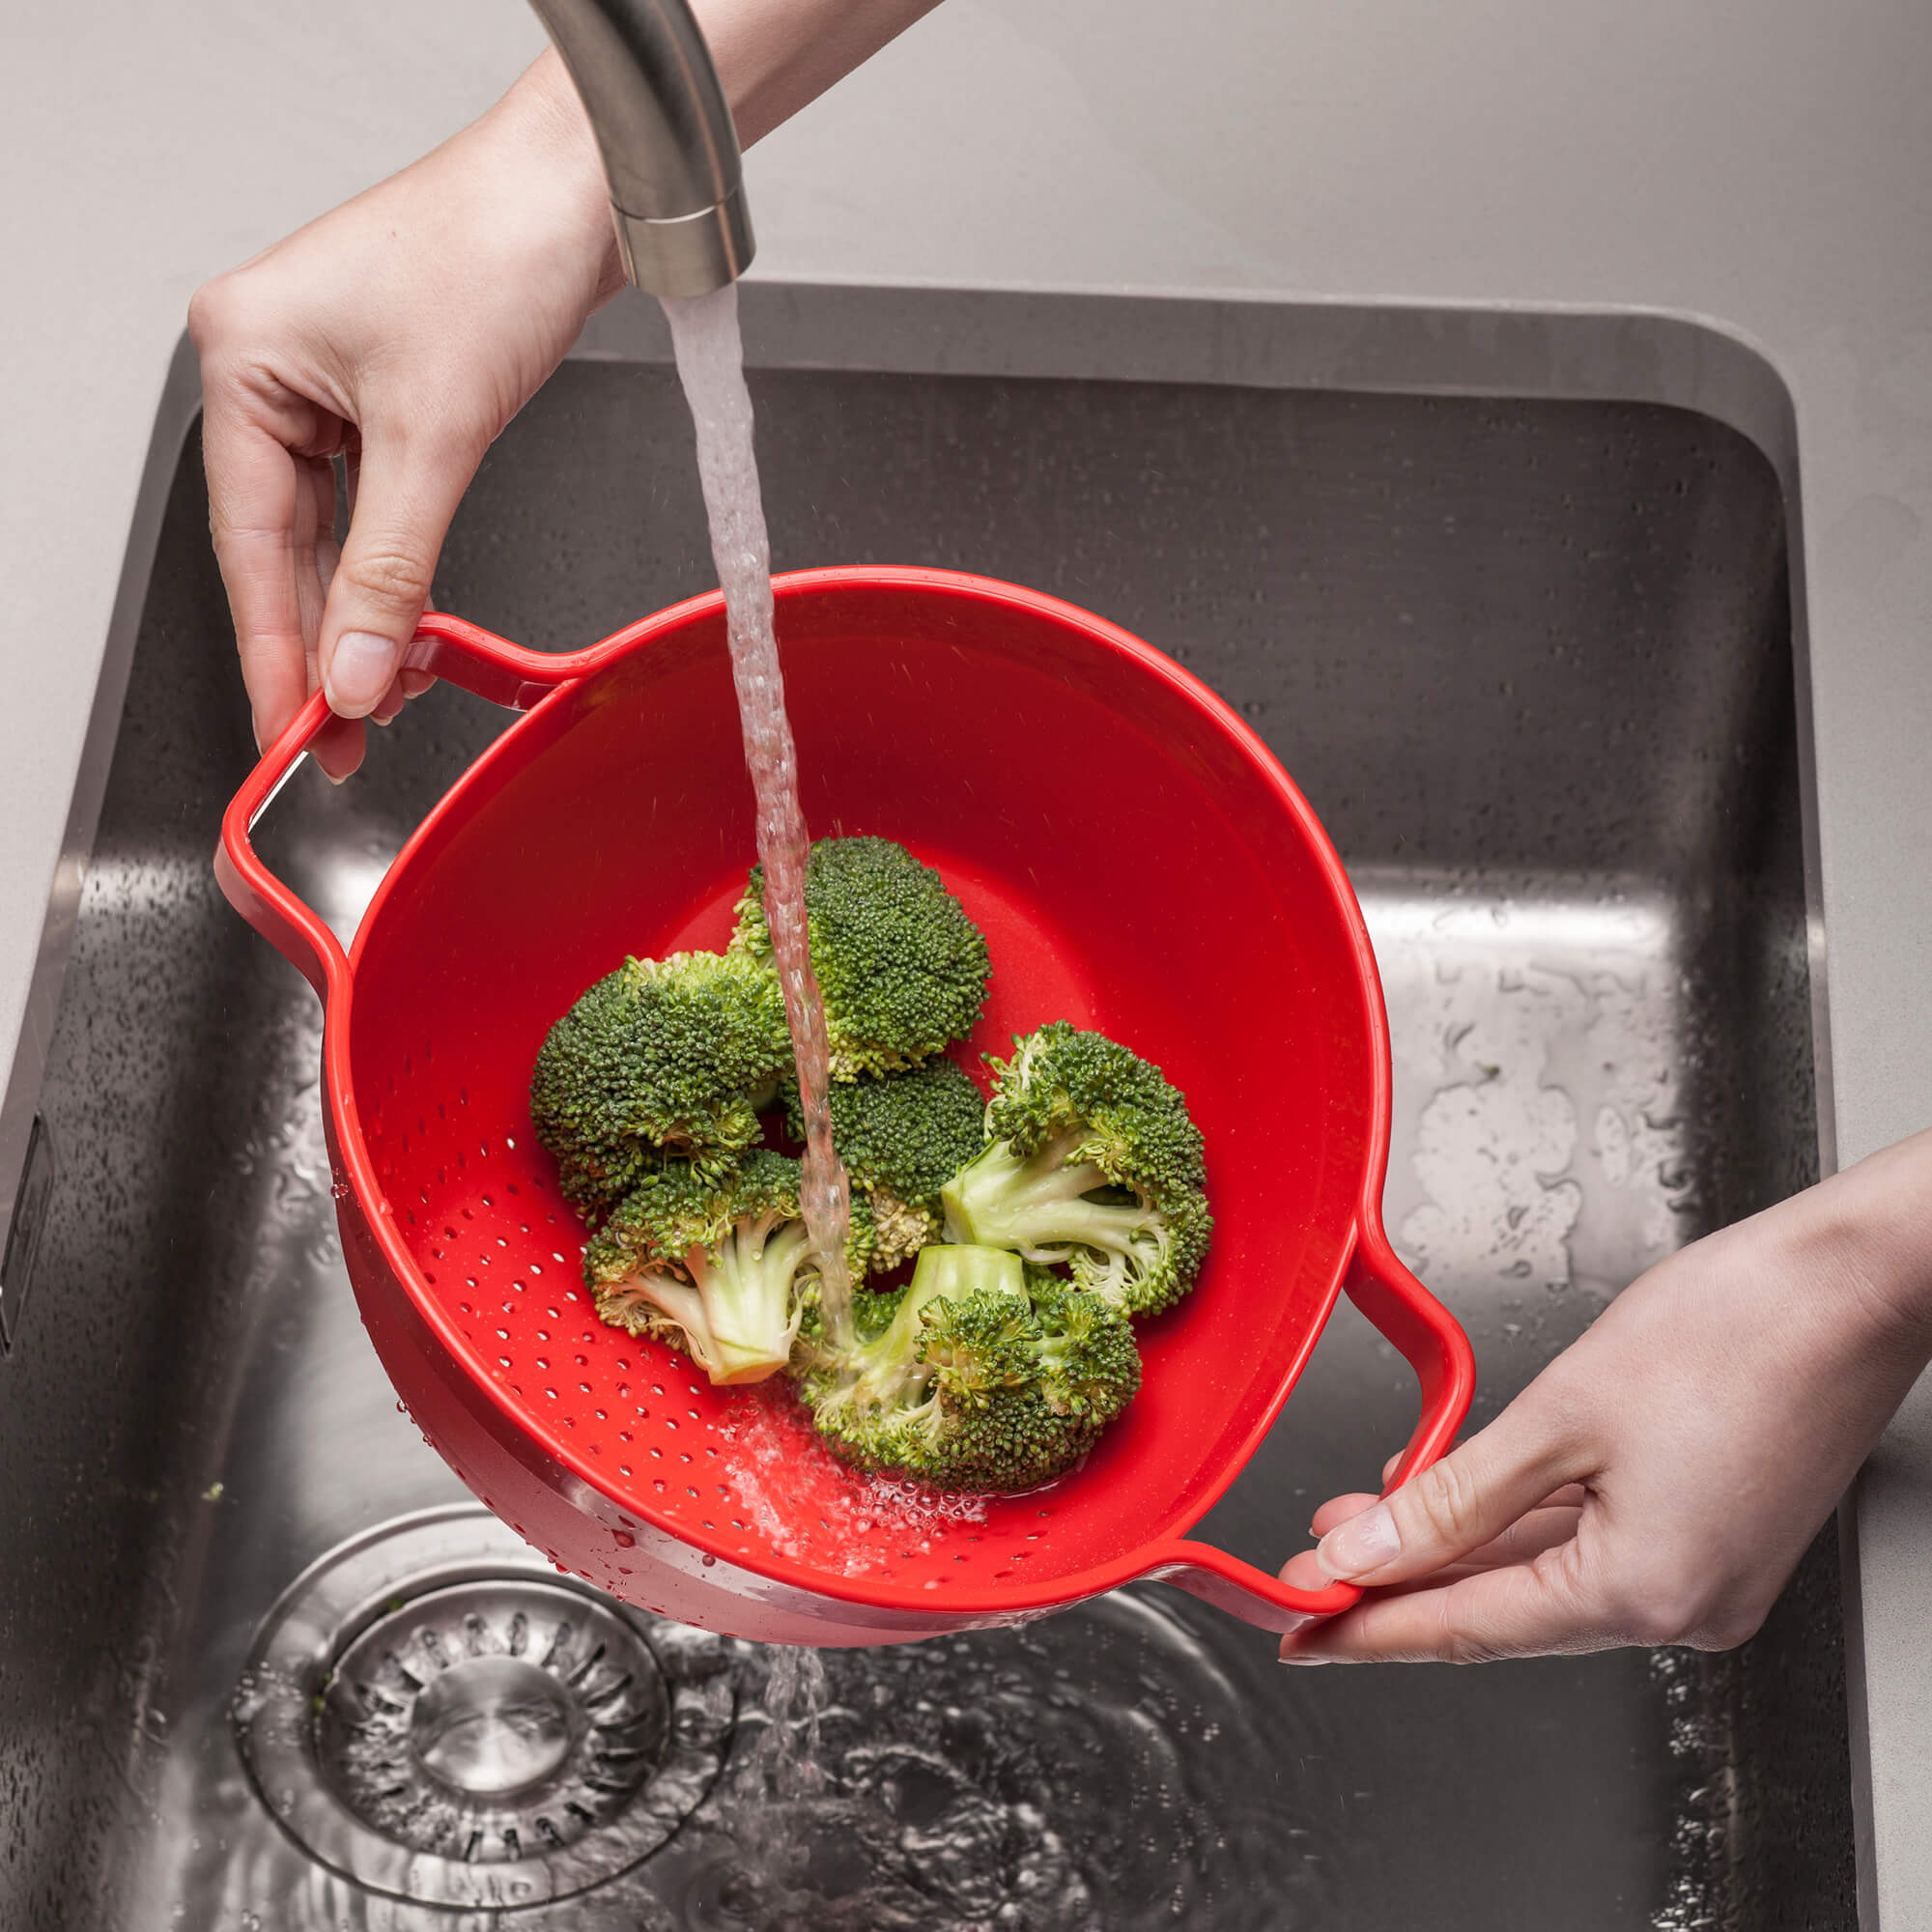 Using a Zeal Drain & Serve Colander to rinse broccoli